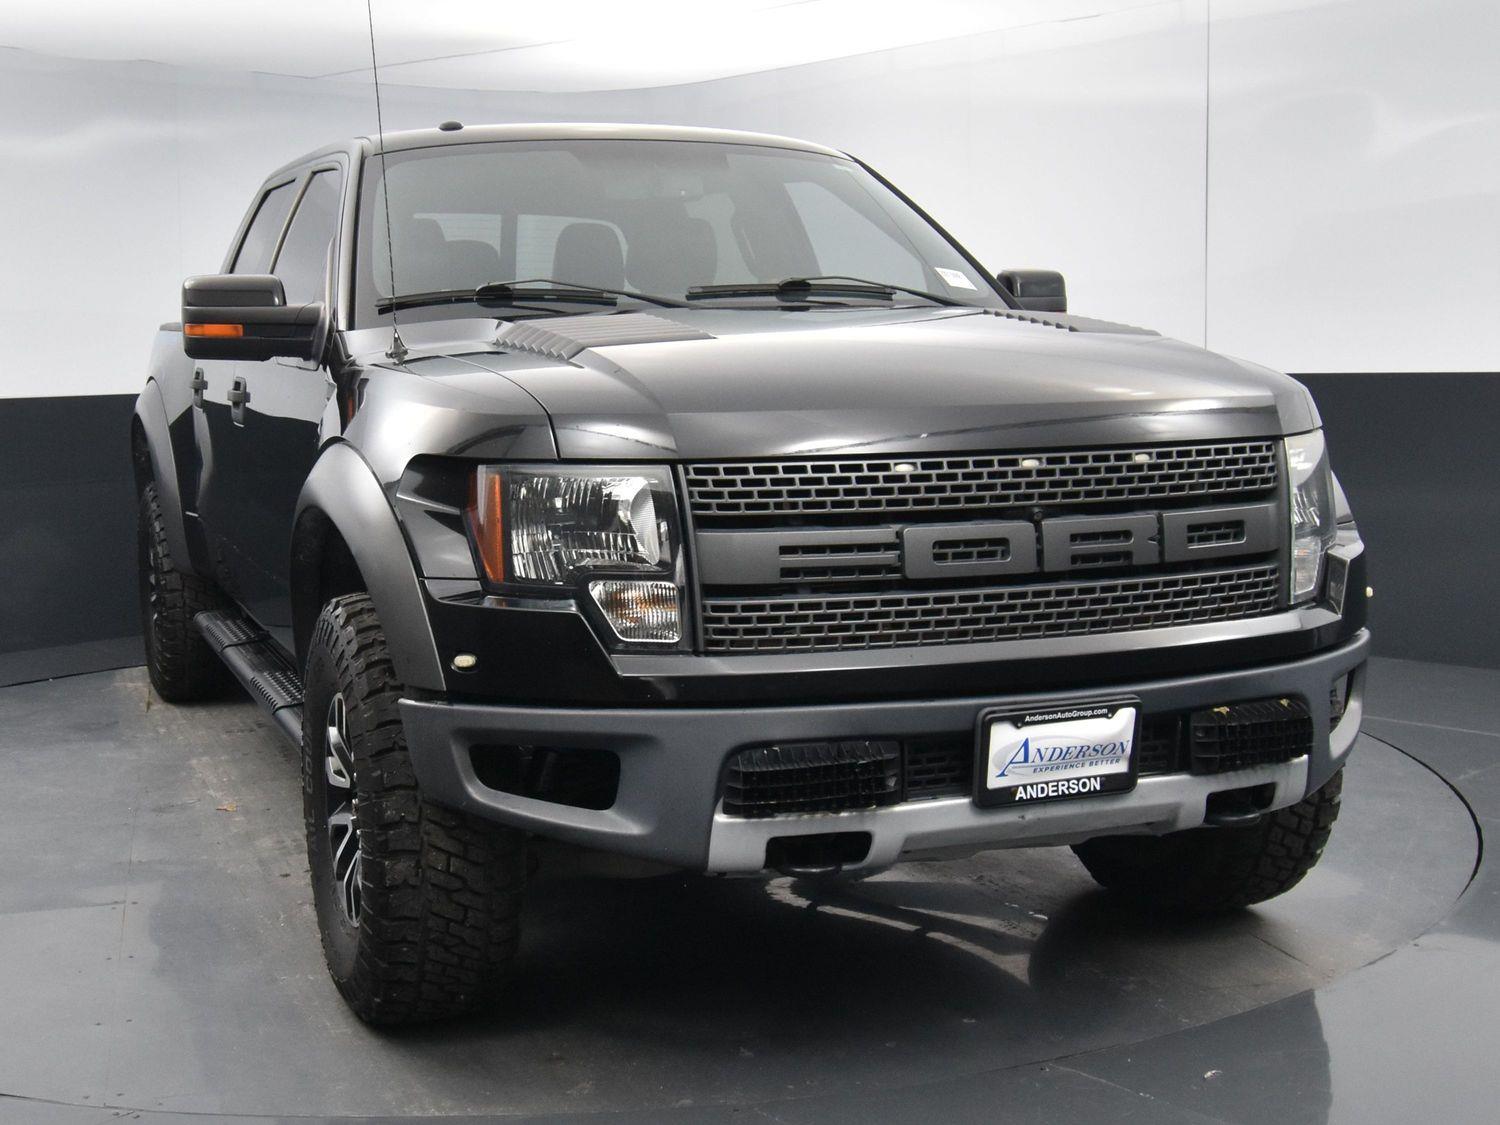 Used 2012 Ford F-150 SVT Raptor Crew Cab Truck for sale in Grand Island NE